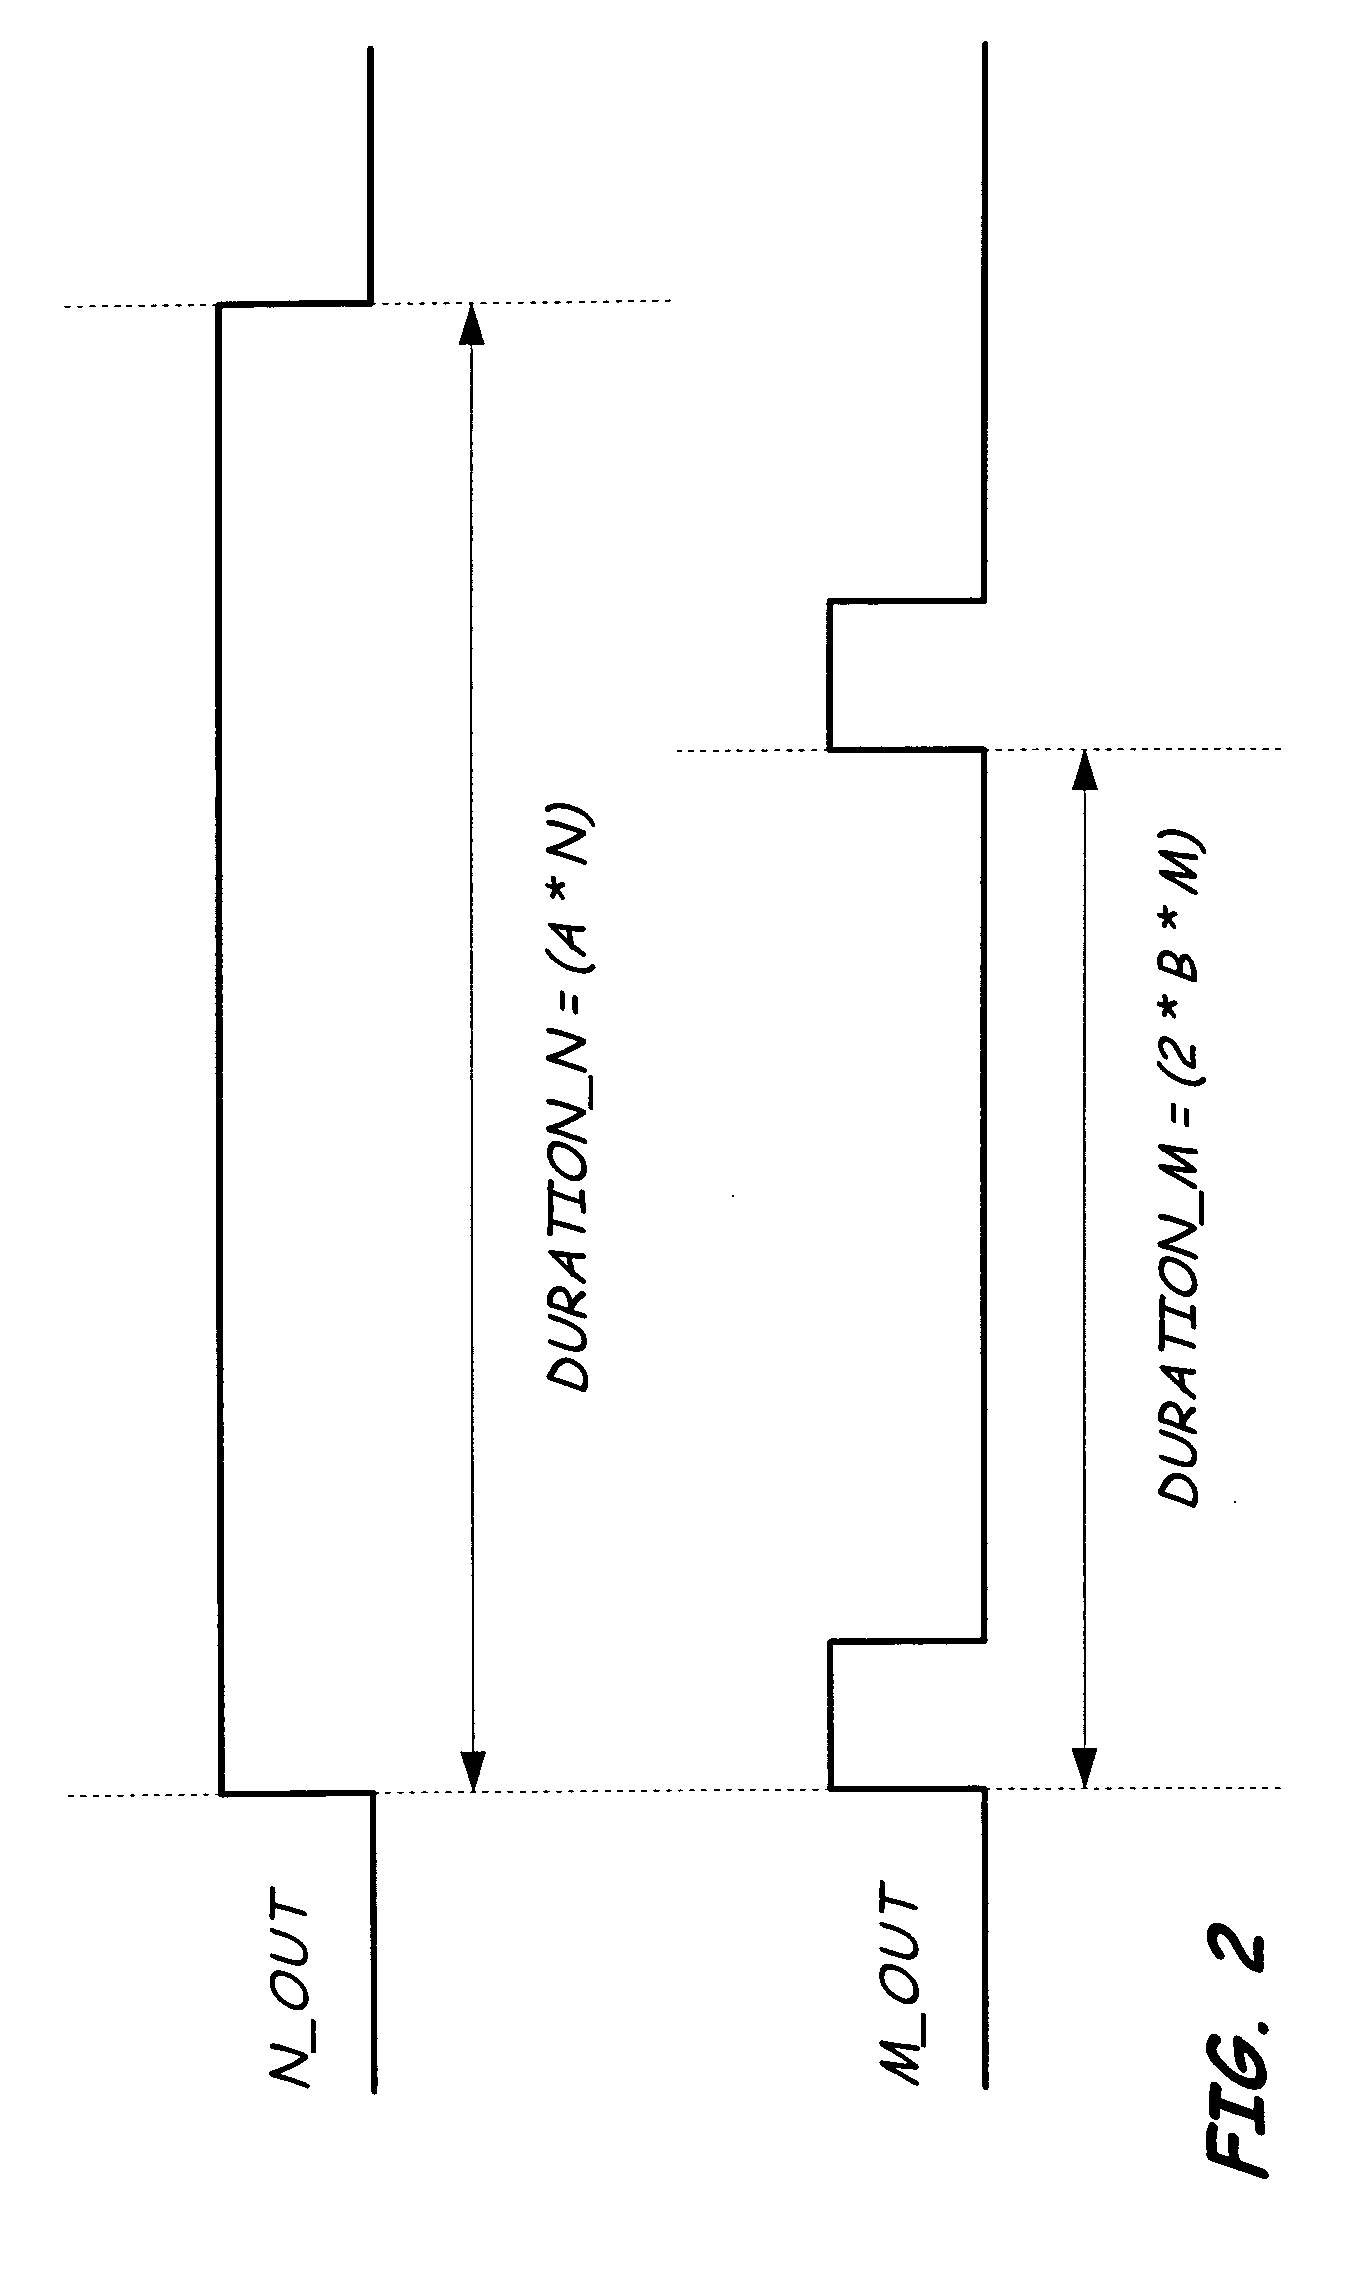 Digital programmable delay scheme with automatic calibration